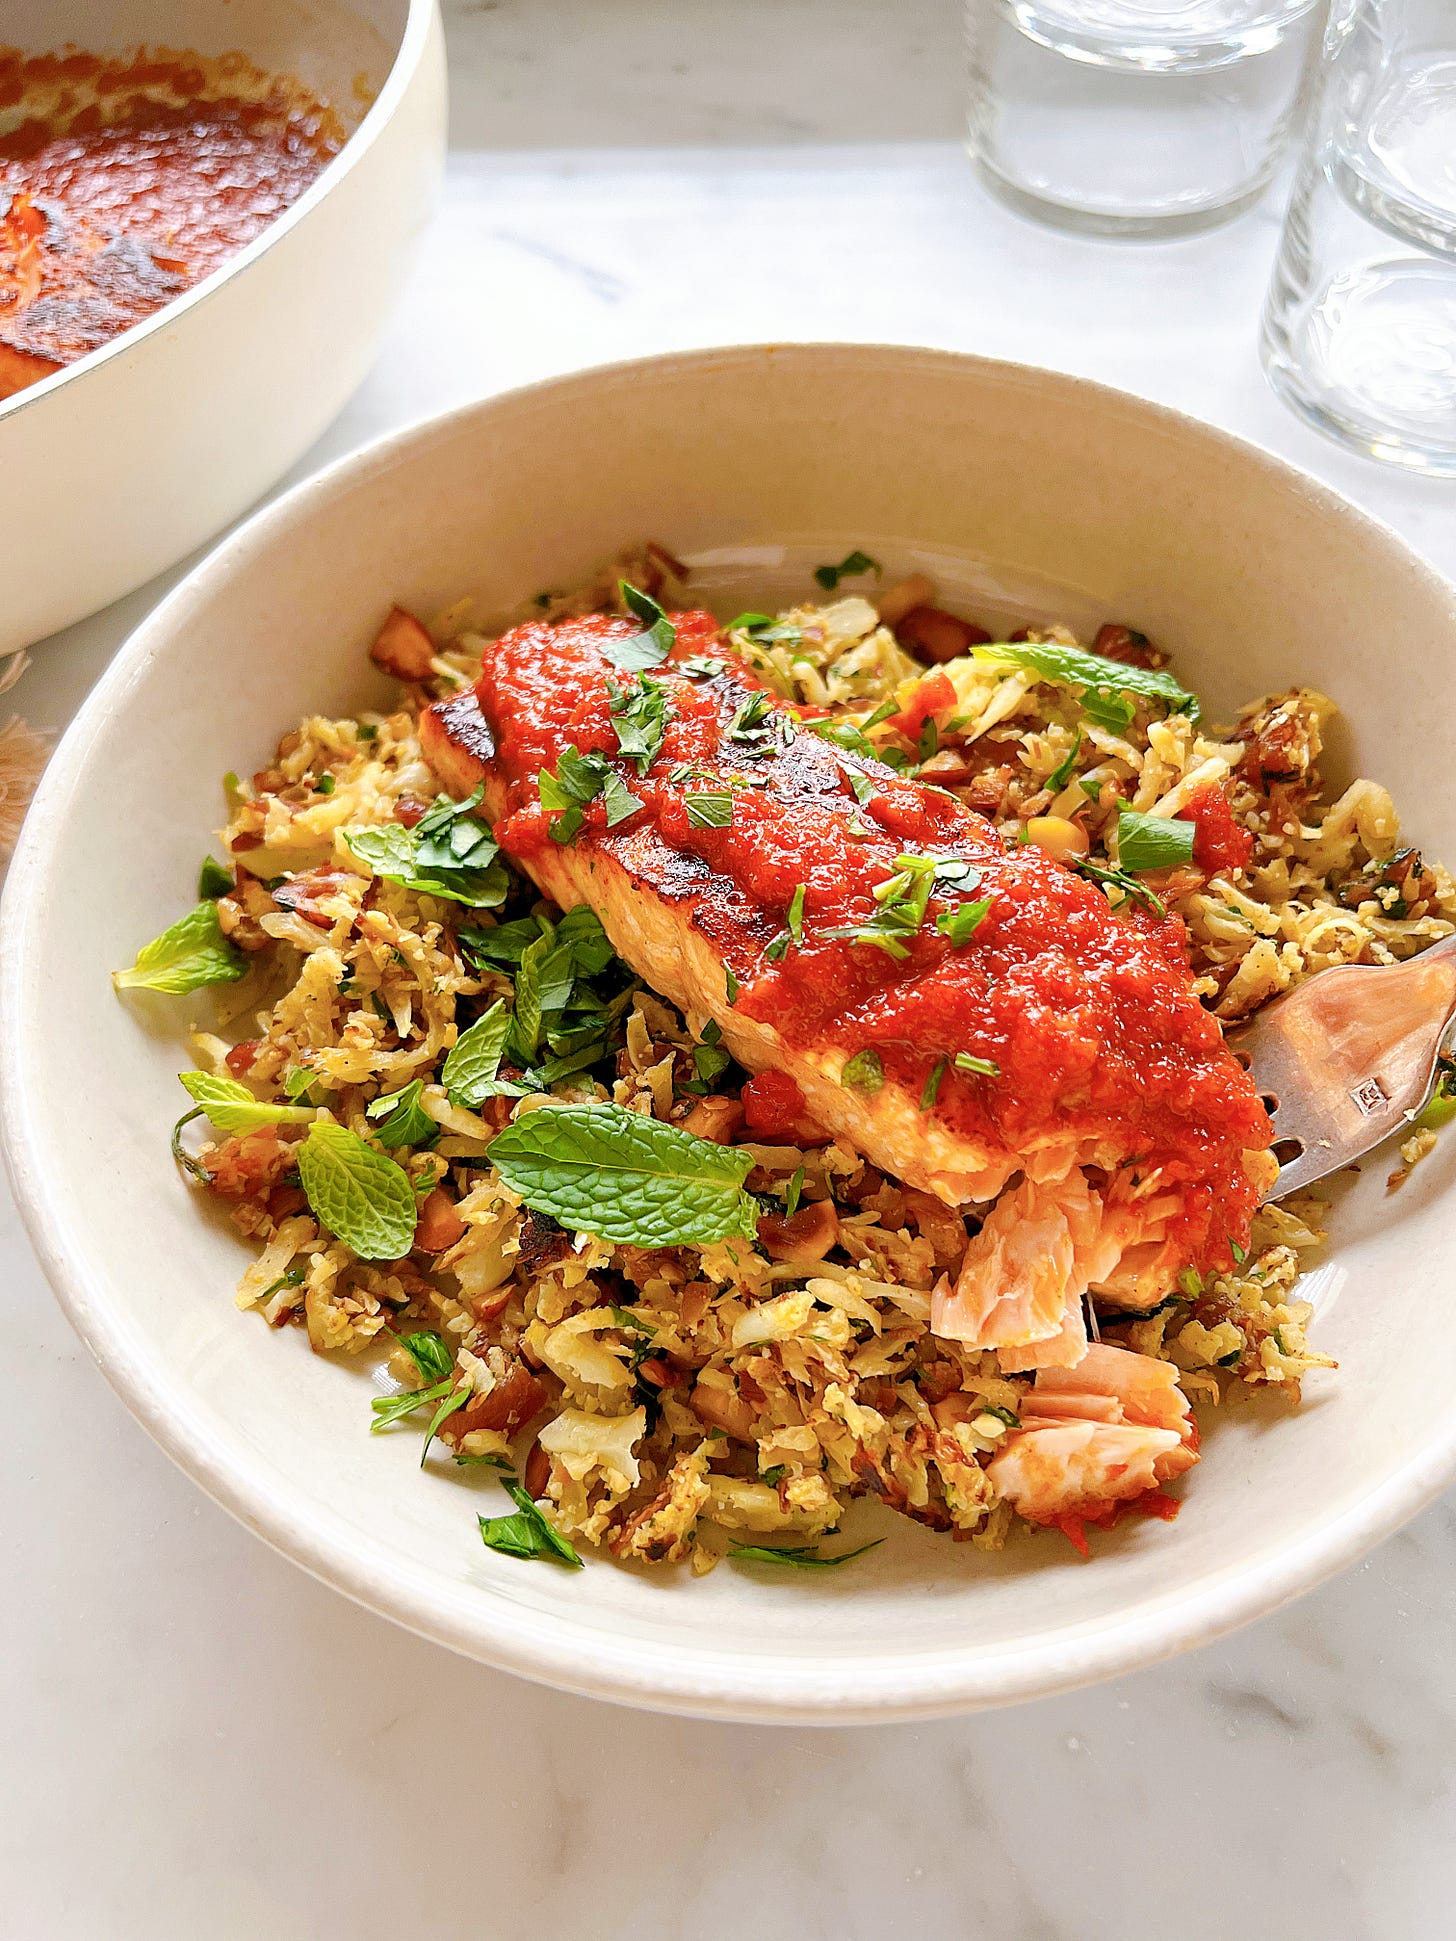 Red Pepper Salmon with Roasted Almond “couscous” in a bowl